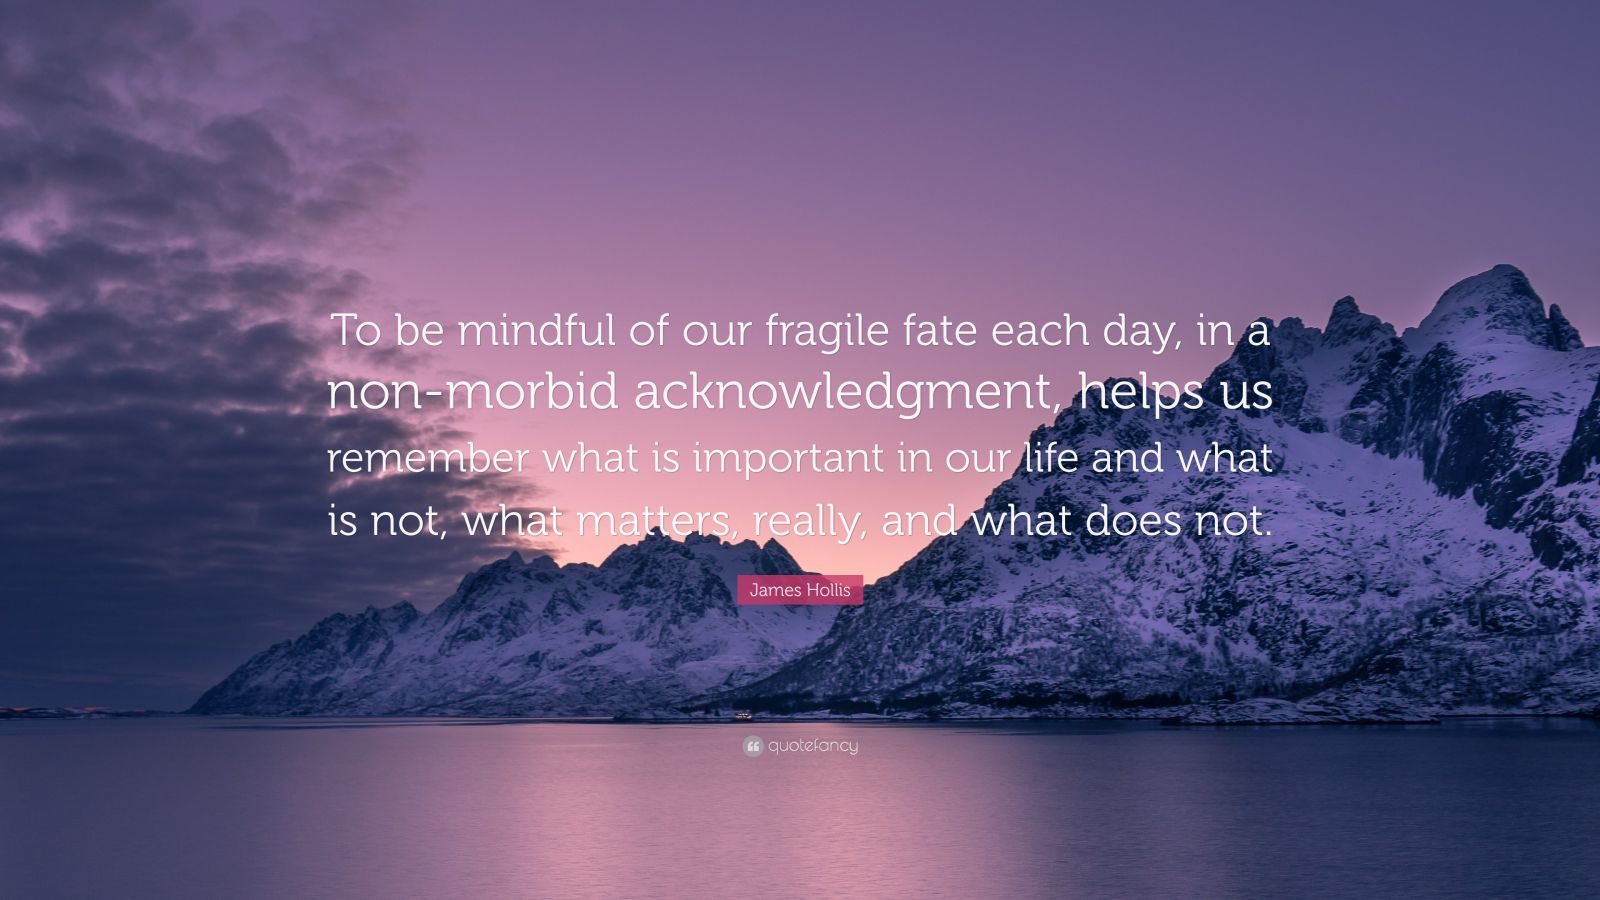 James Hollis Quote: “To be mindful of our fragile fate each day, in a ...